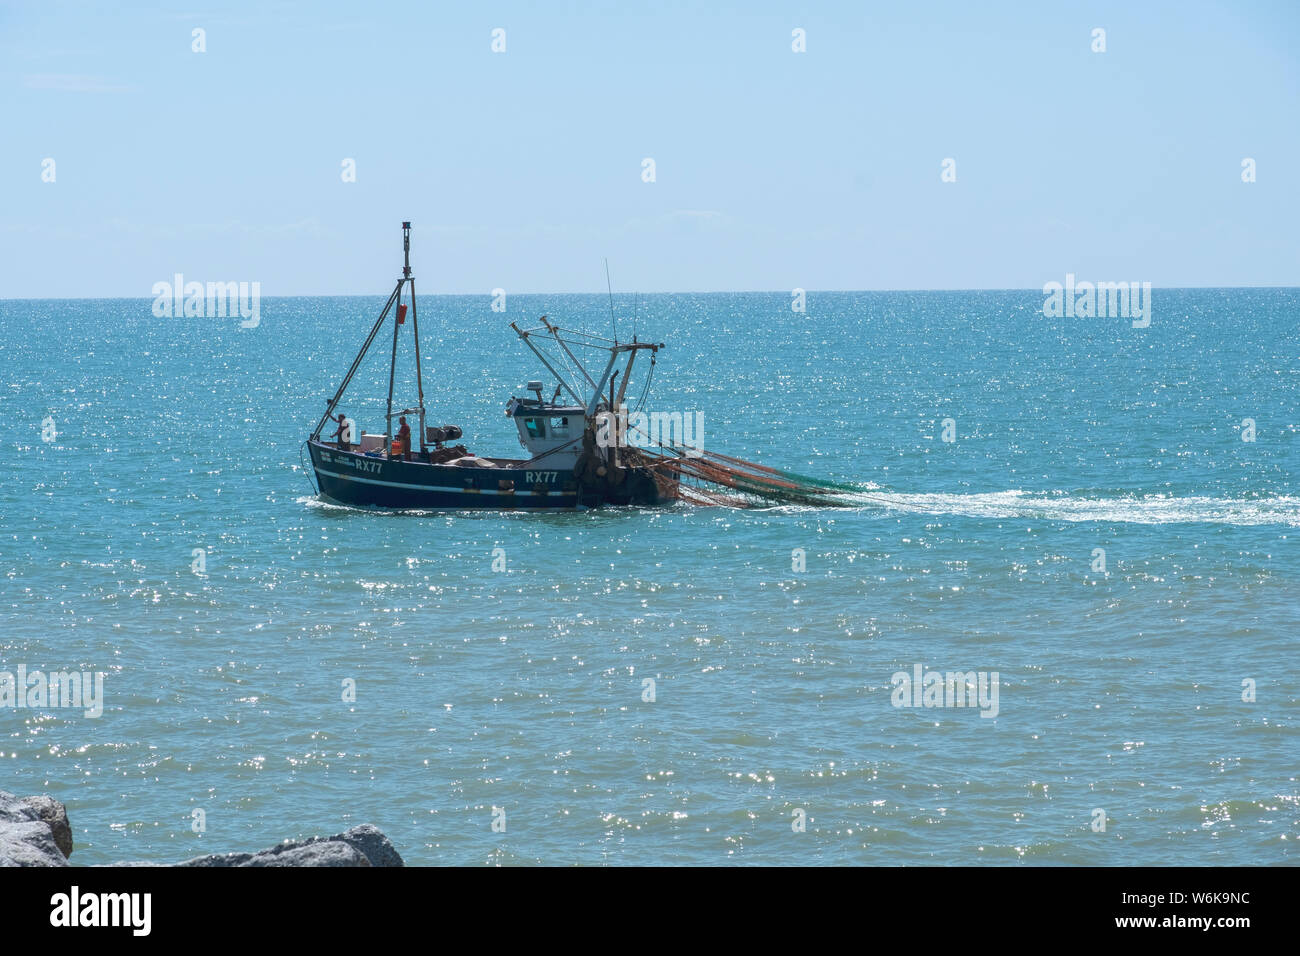 Hastings fishing trawler returning to Harbour with trawl nets out close to shore, East Sussex, UK Stock Photo